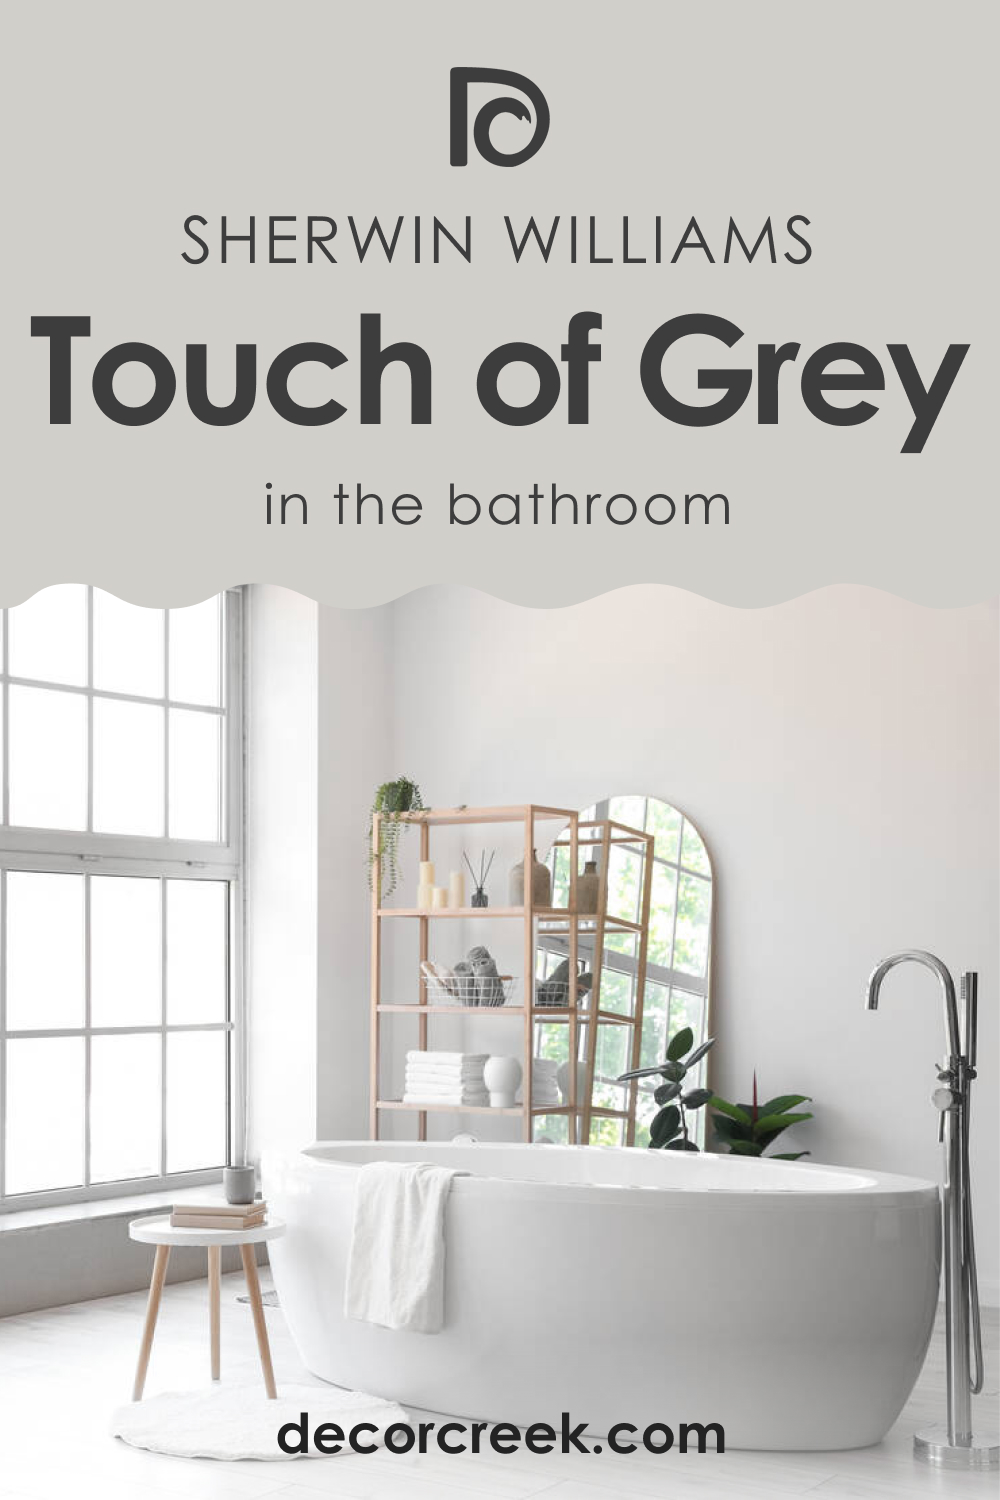 How to Use SW 9549 Touch of Grey in the Bathroom?